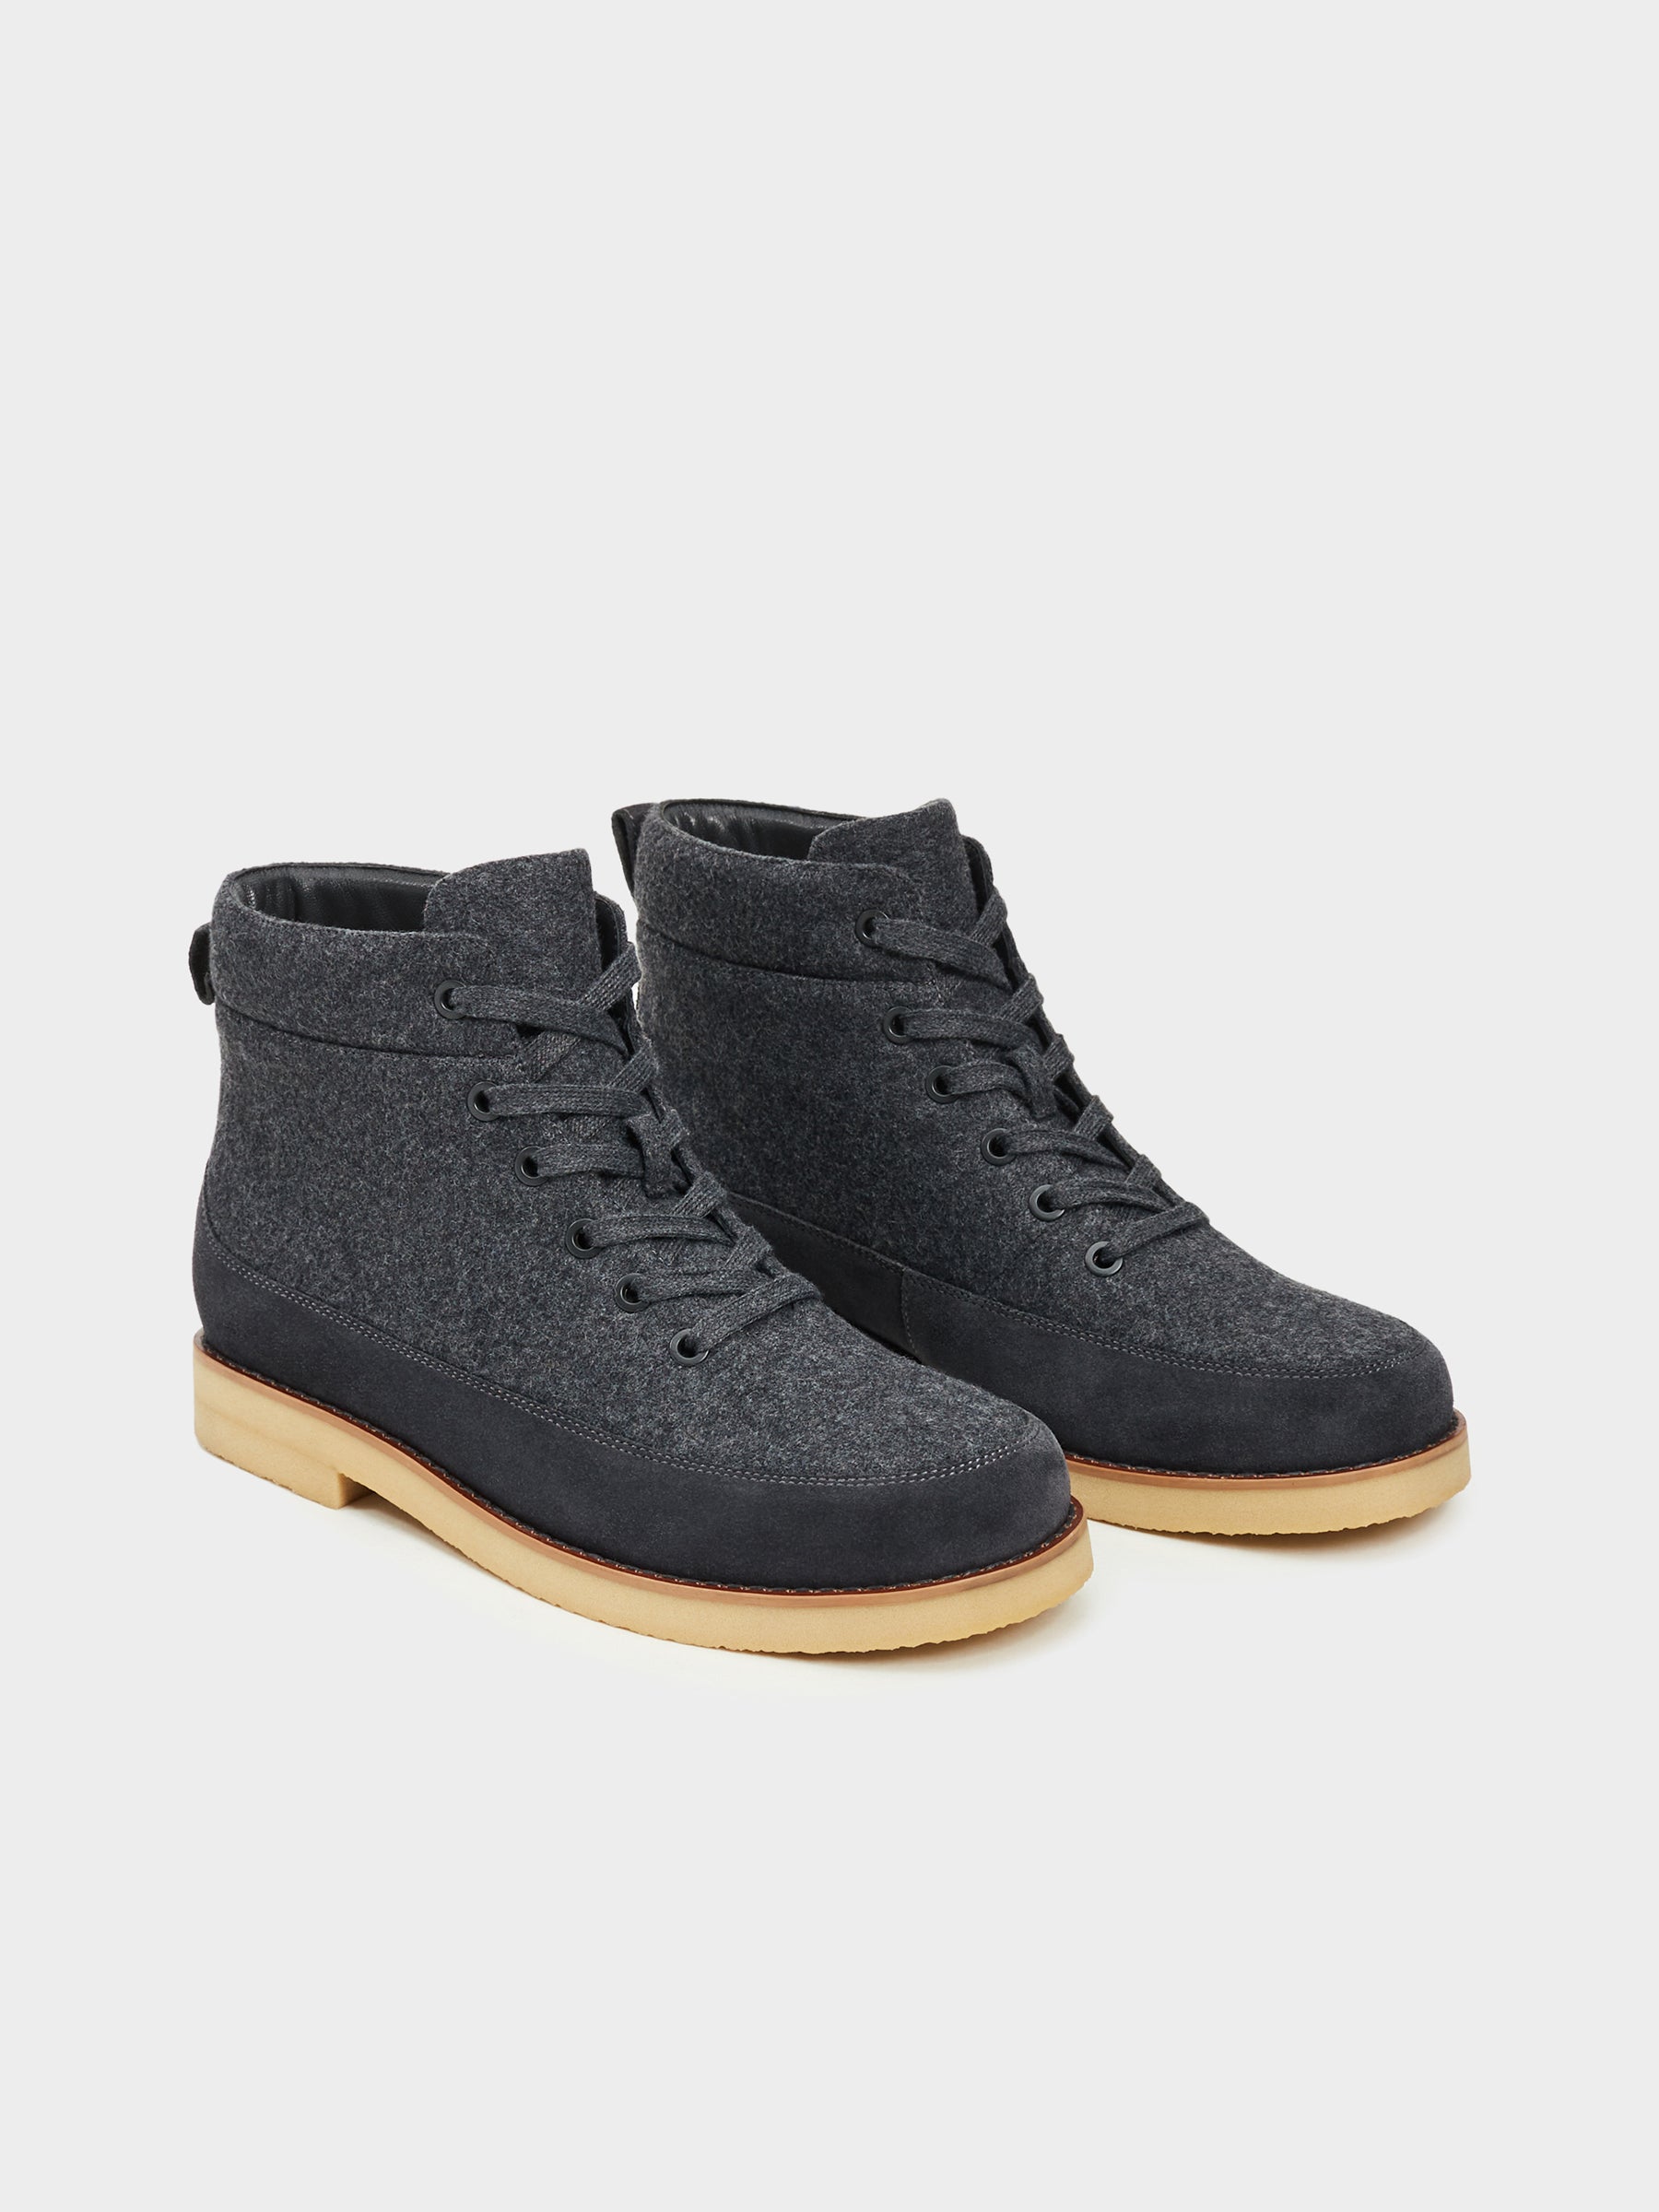 Wool lace-up boots